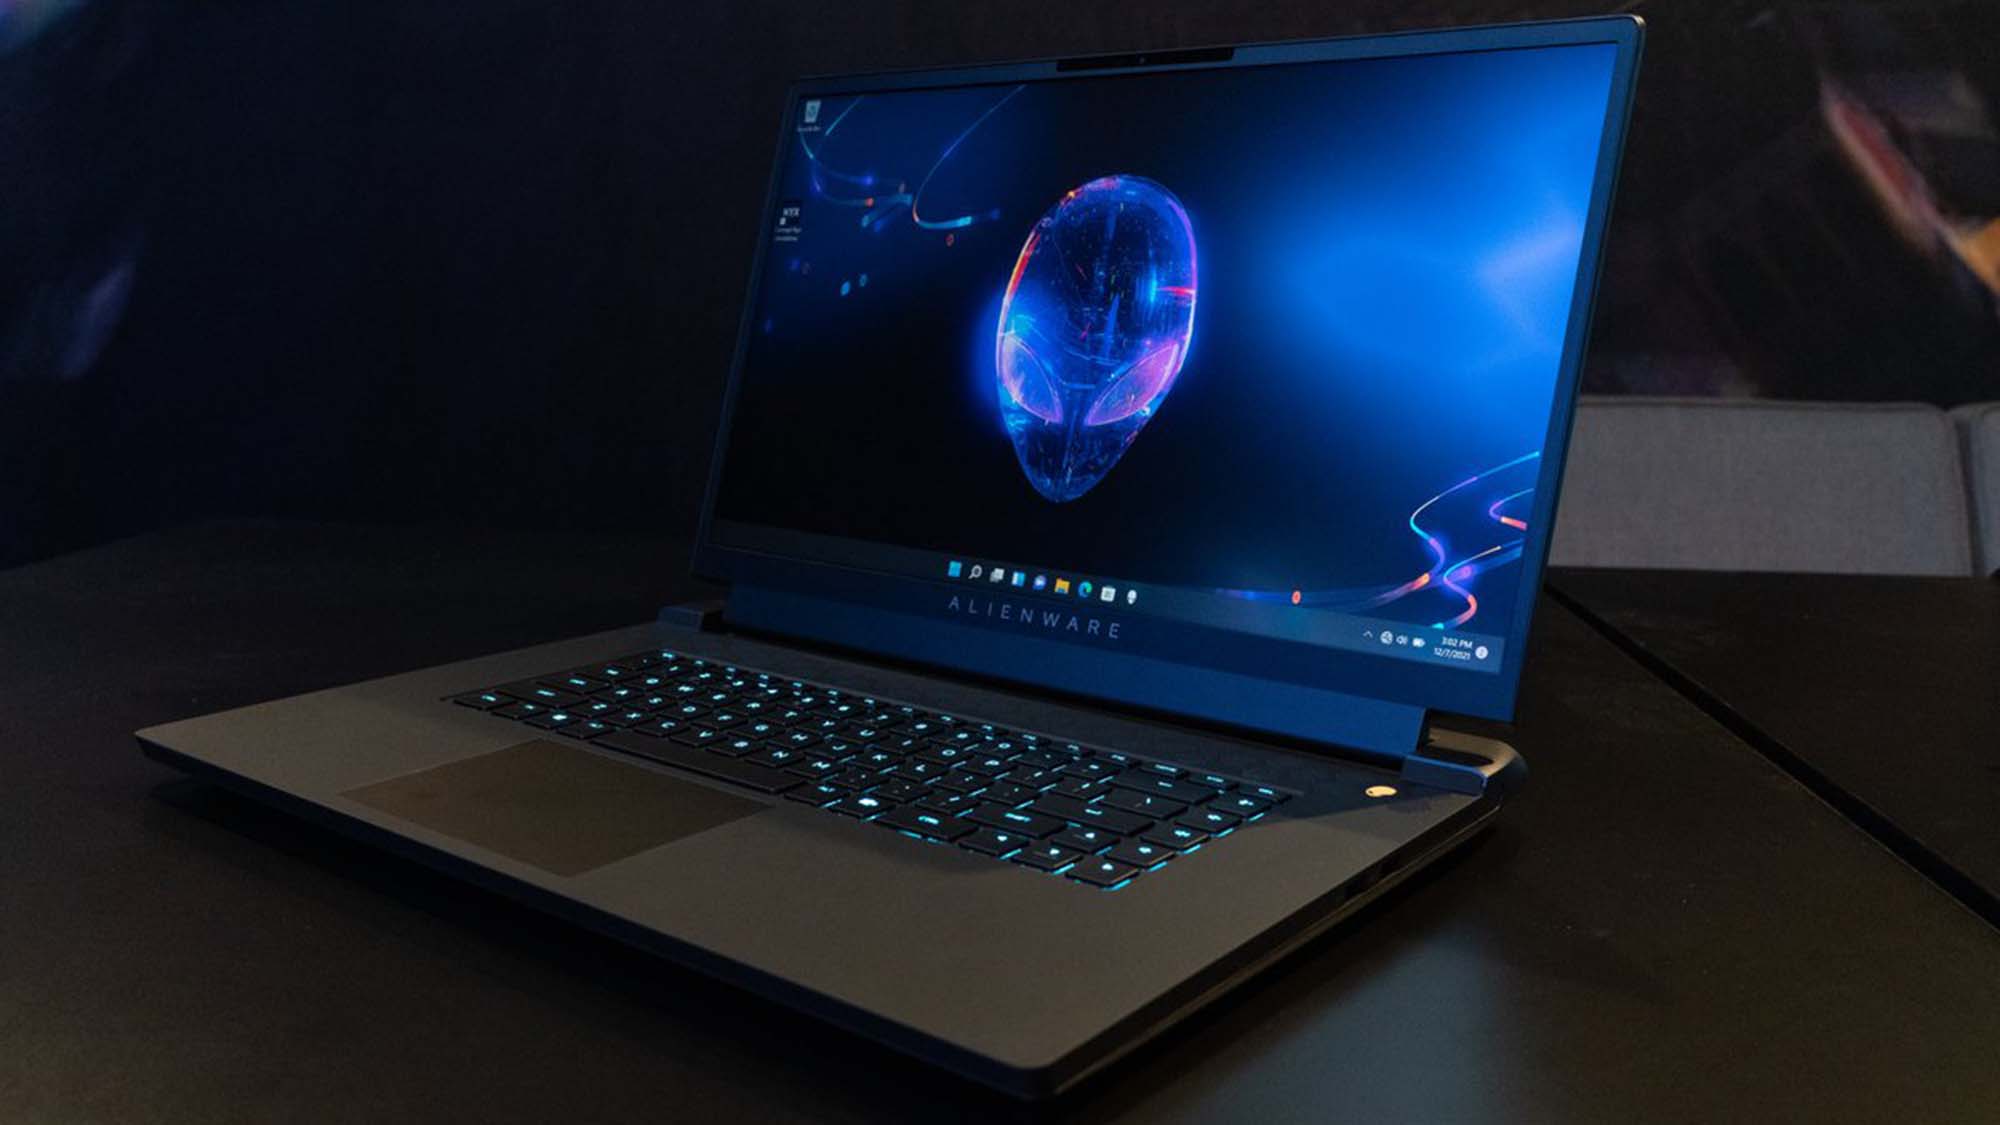 An Alienware gaming laptop sitting on a table in a darkened room